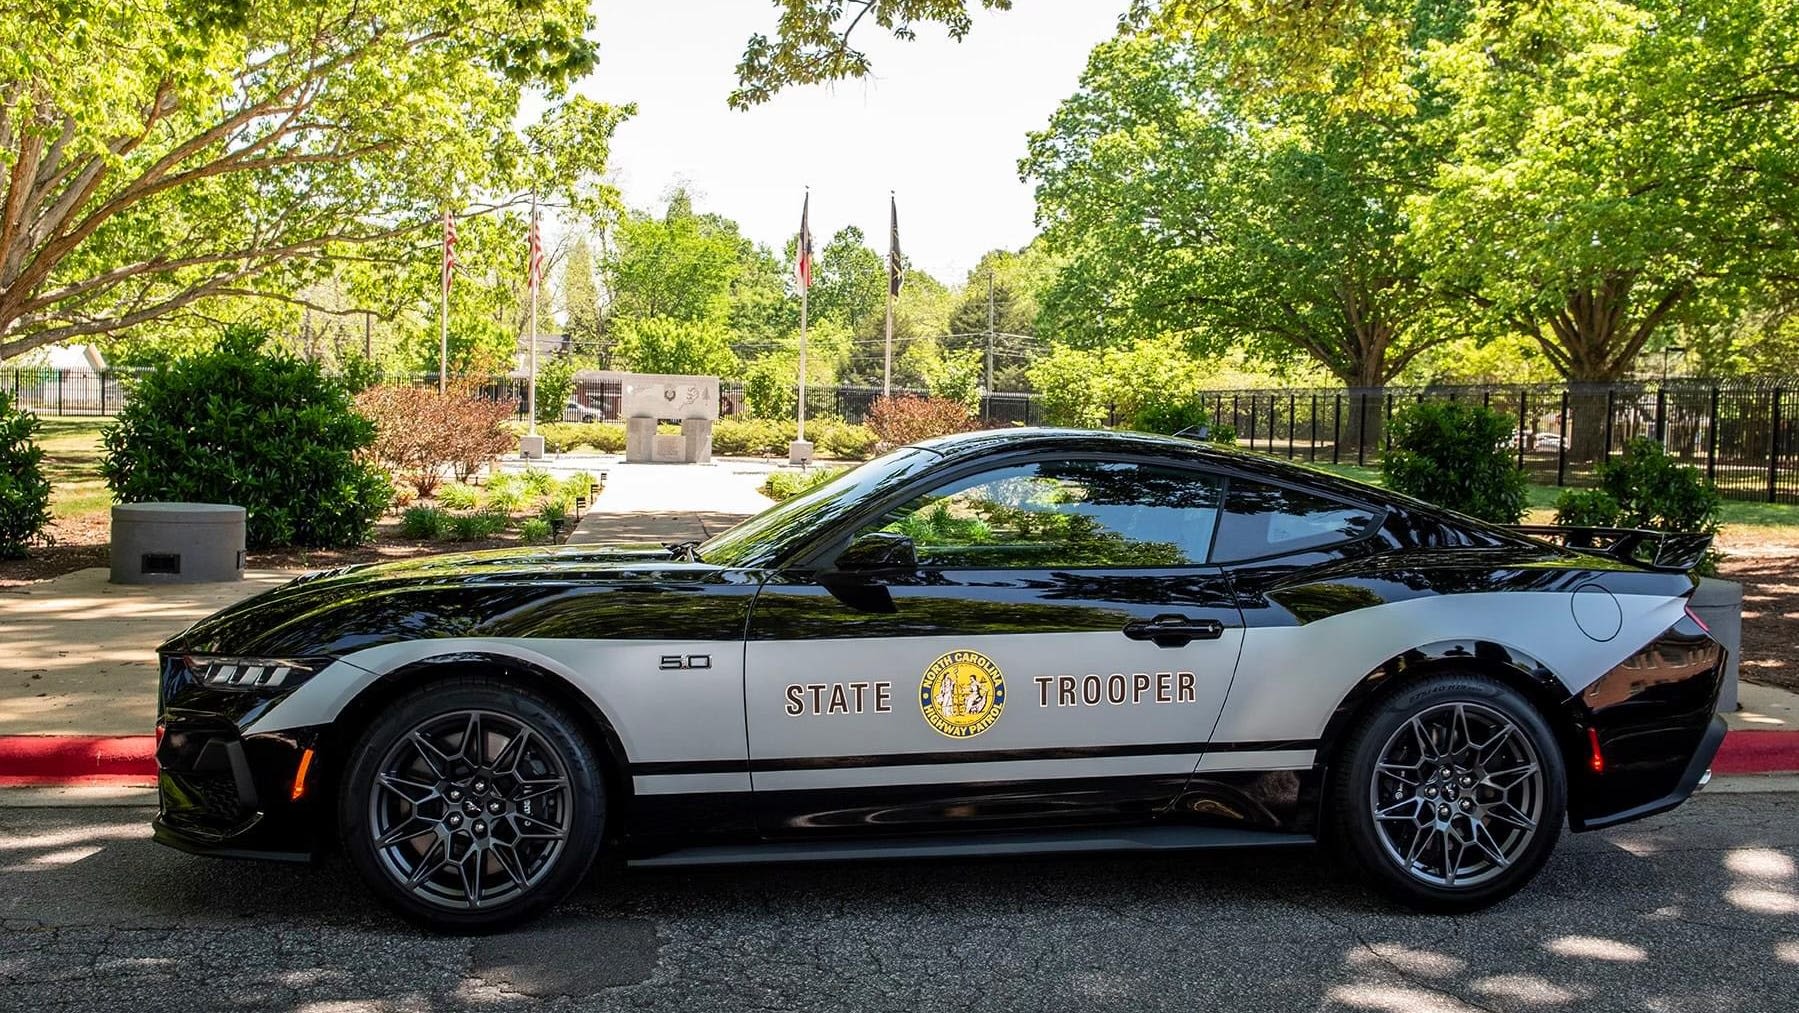 Police departments buying fast Ford Mustang GT to help catch high-speed drivers